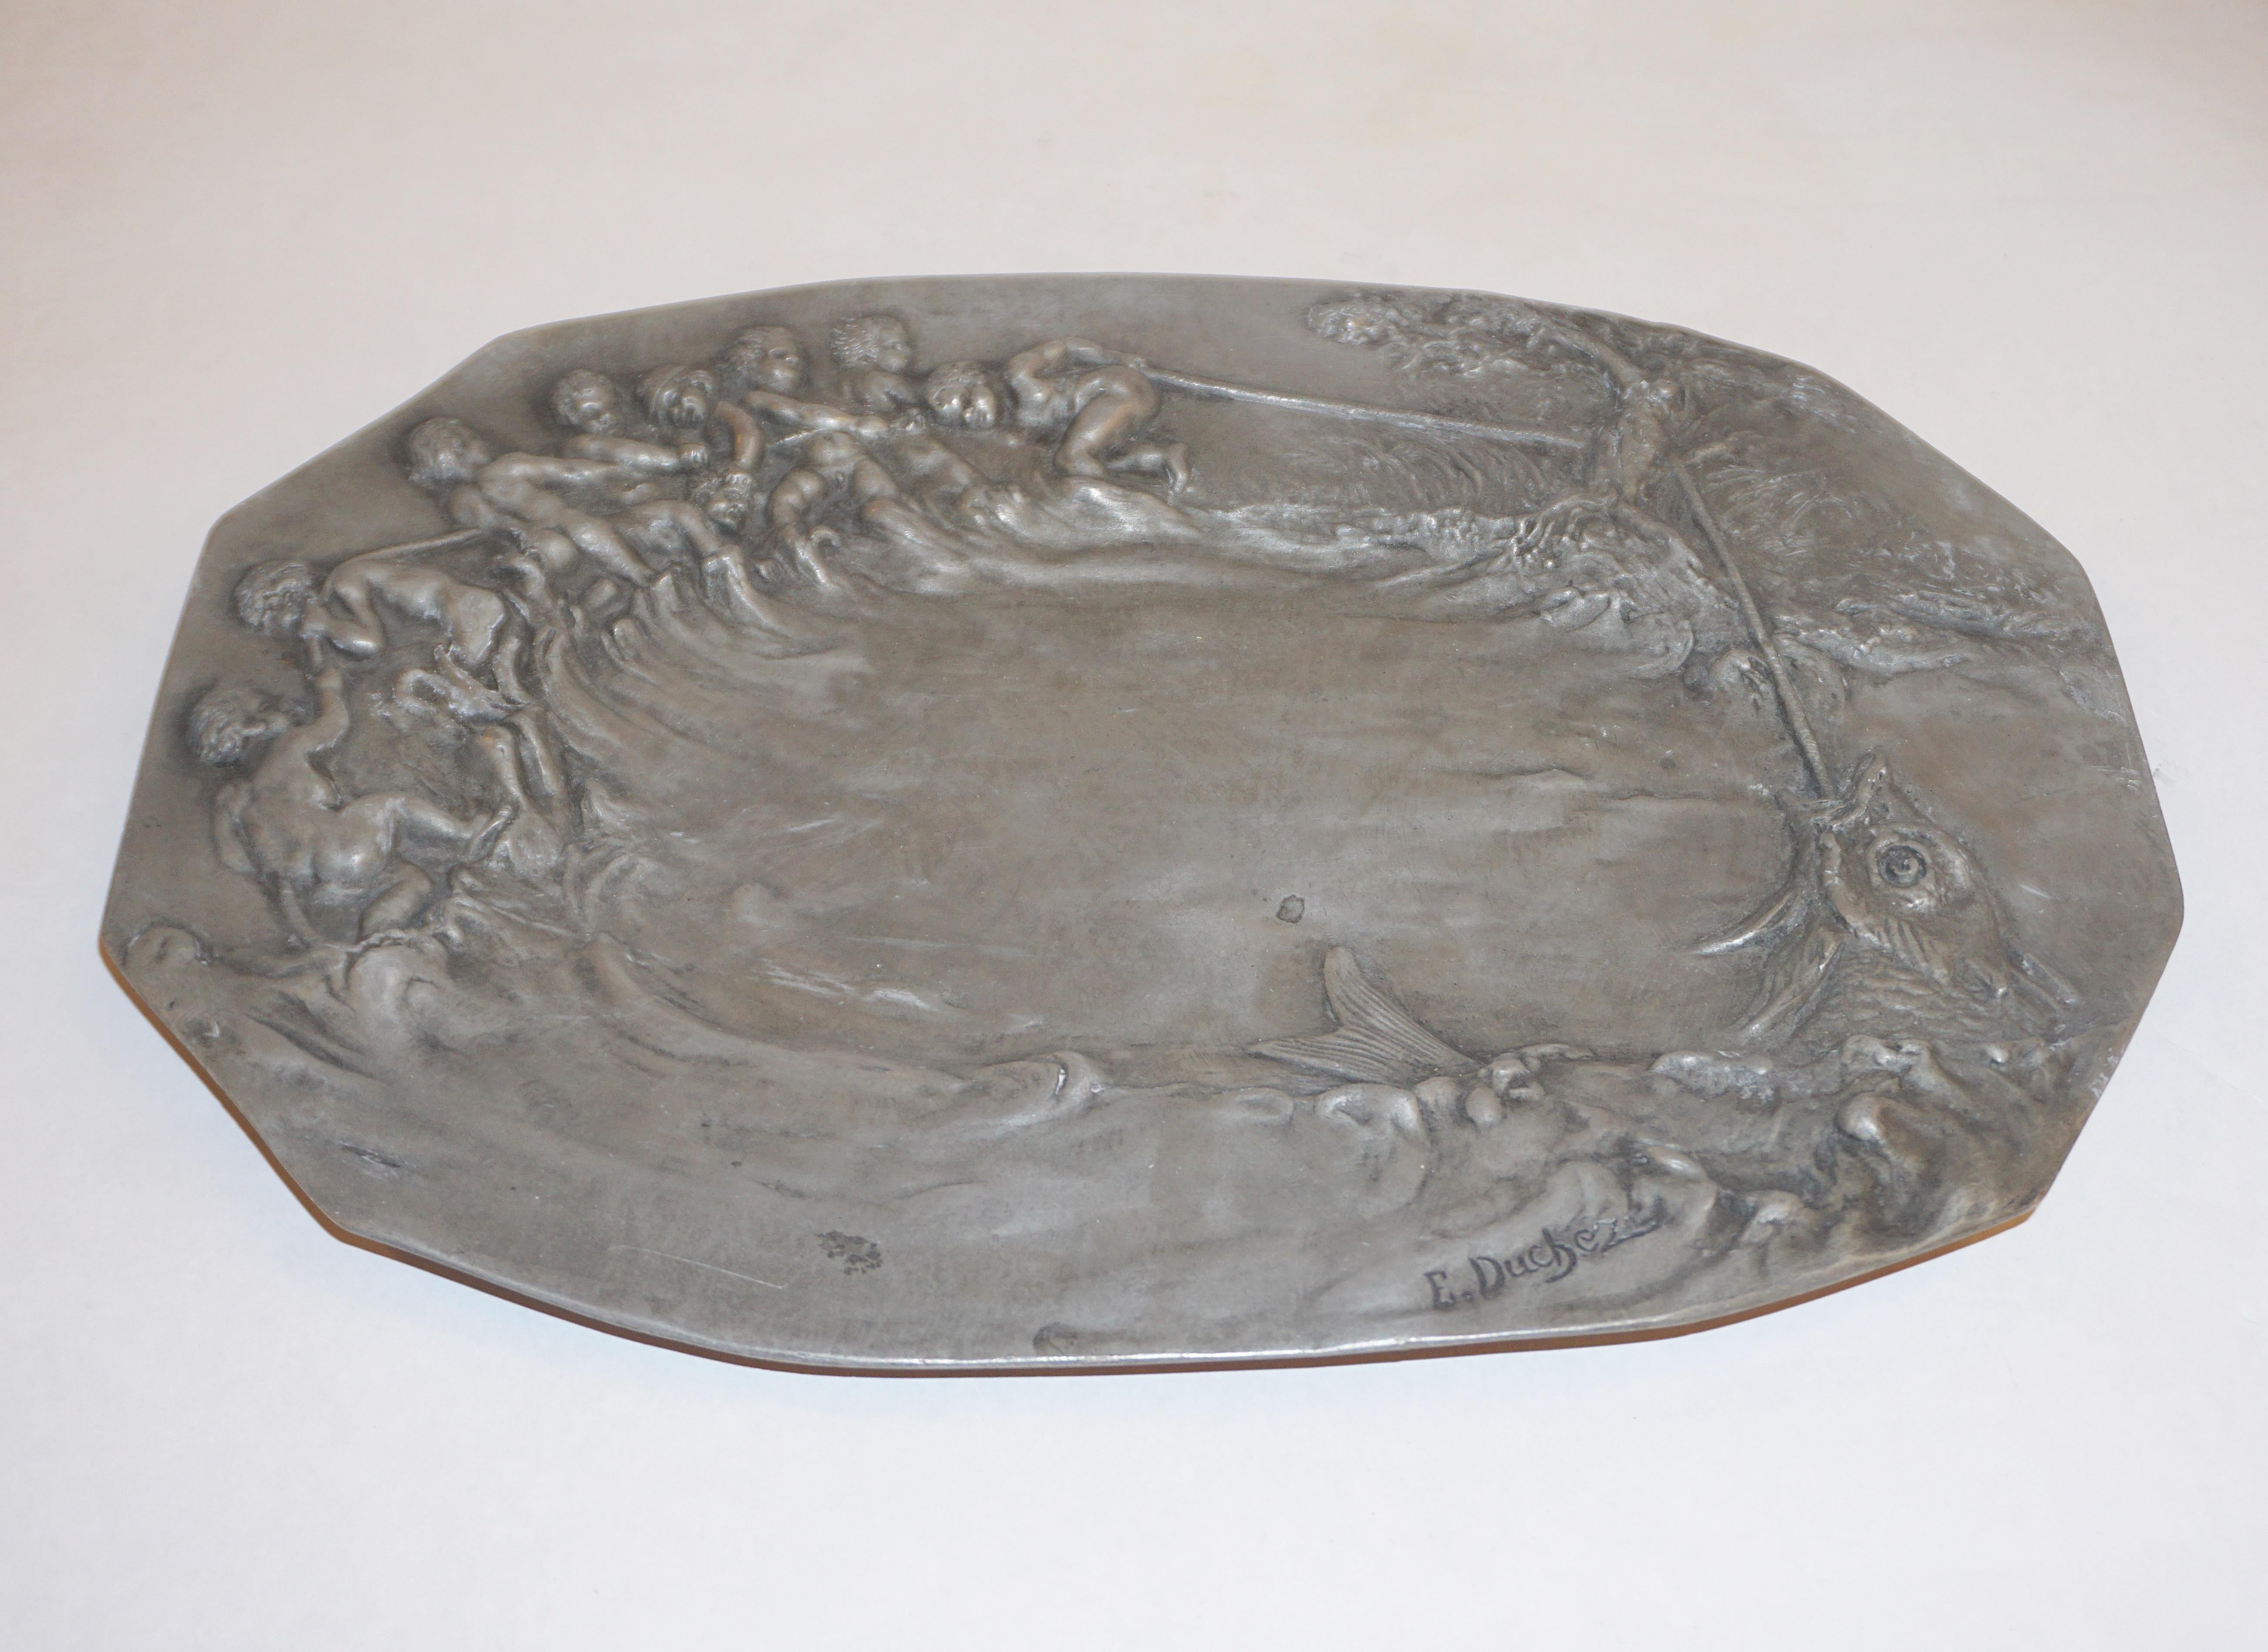 1900s French Art Nouveau Sculpted Pewter Dish with Fishing Putti in Relief For Sale 3